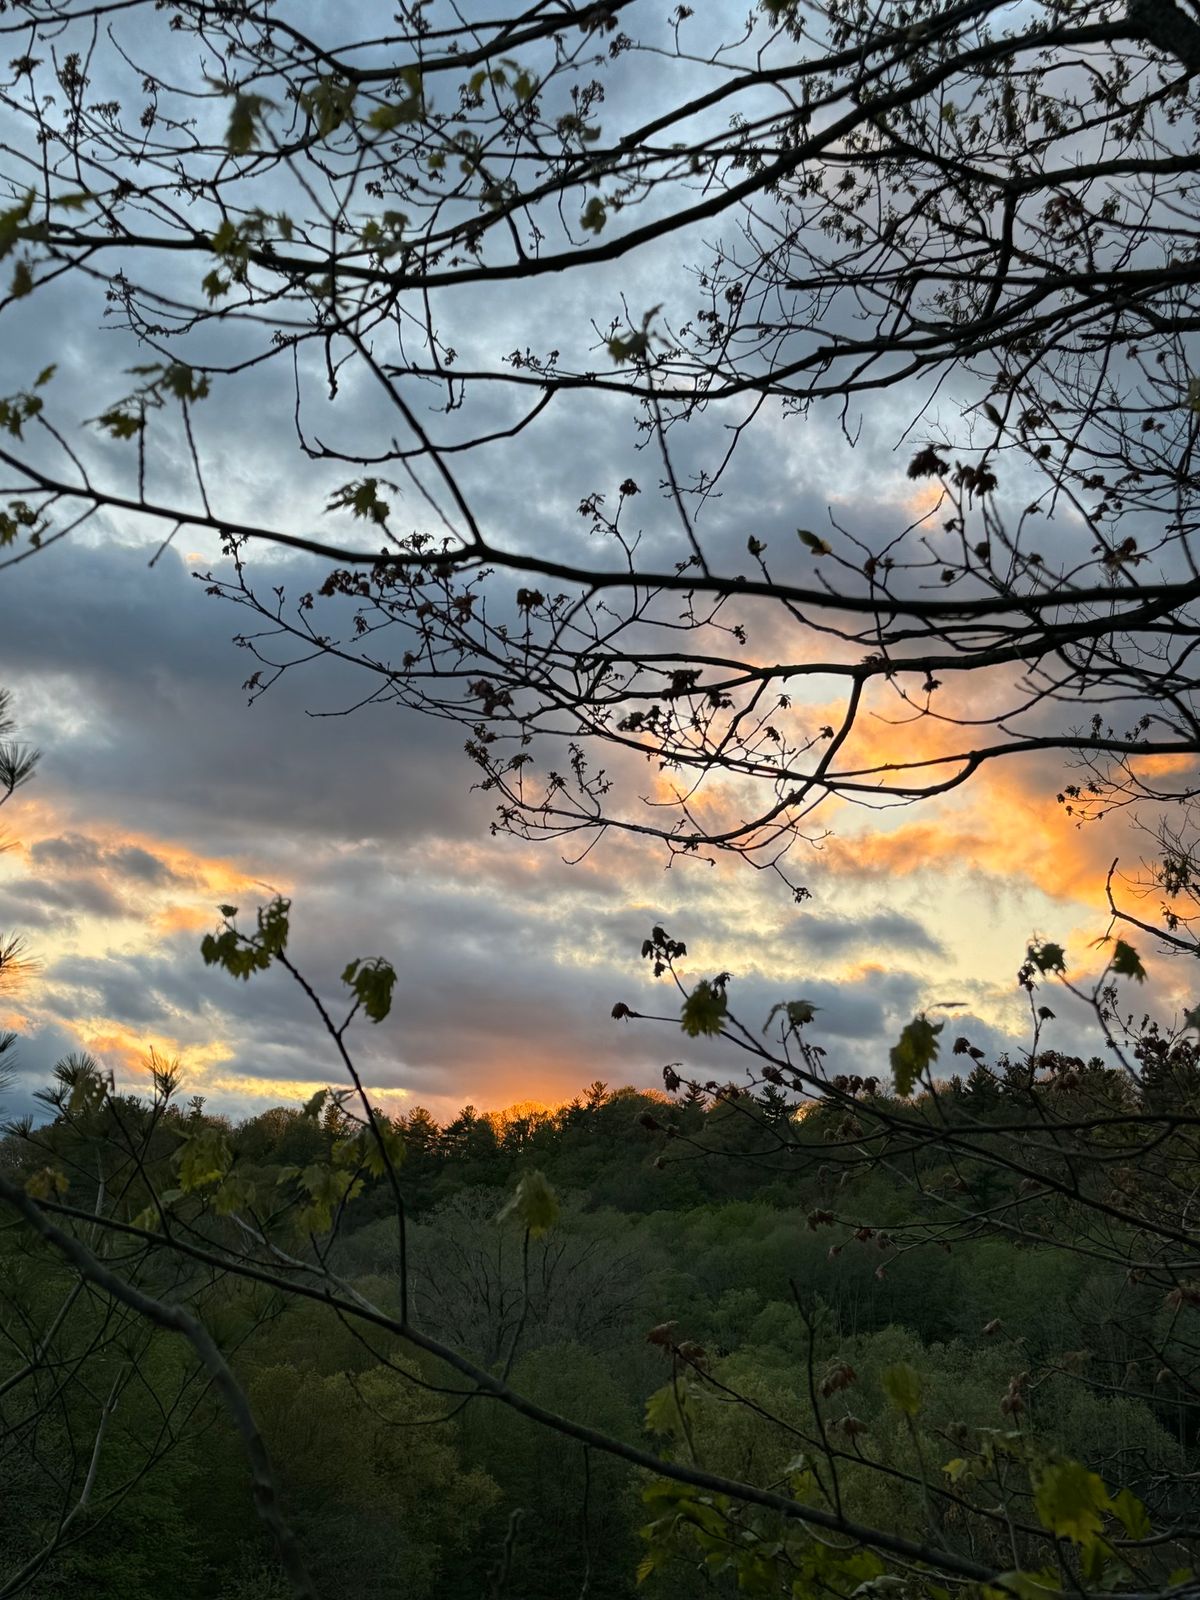 16 mile creek evening hike - May 15th 7pm 